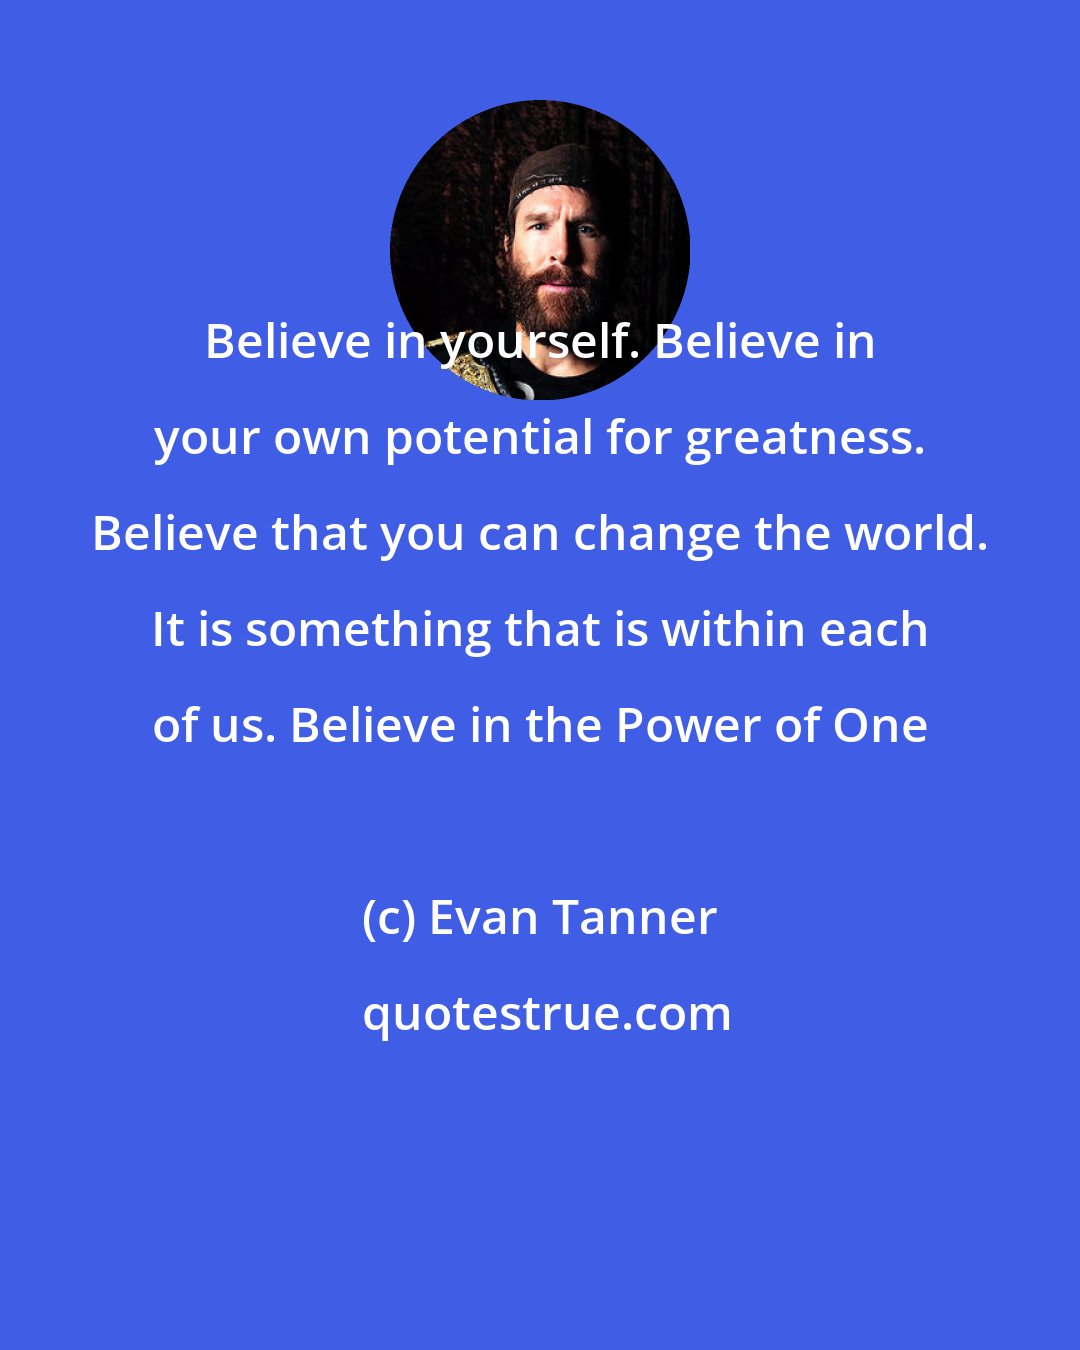 Evan Tanner: Believe in yourself. Believe in your own potential for greatness. Believe that you can change the world. It is something that is within each of us. Believe in the Power of One